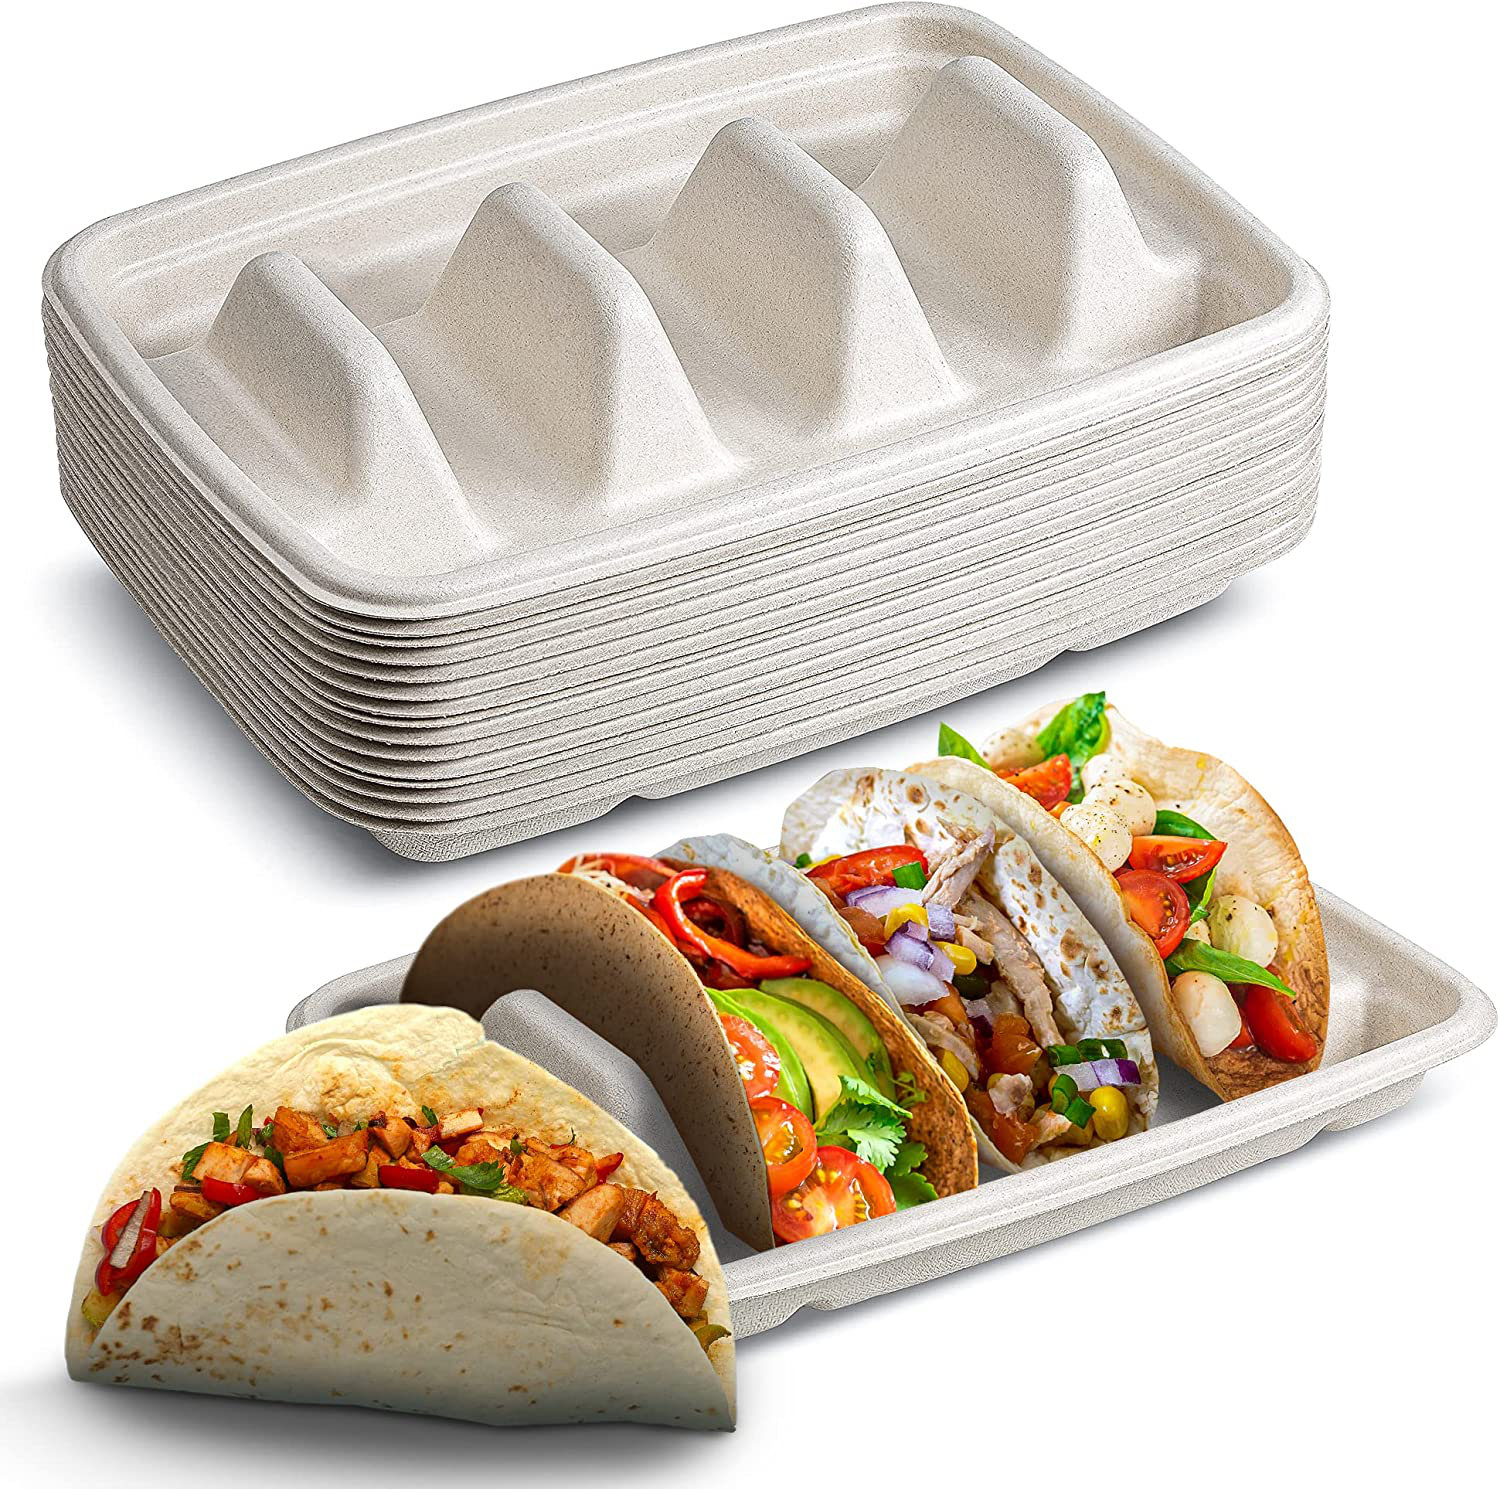 Disposable Fiber Lunch & Cafeteria Tray - 5 Compartment